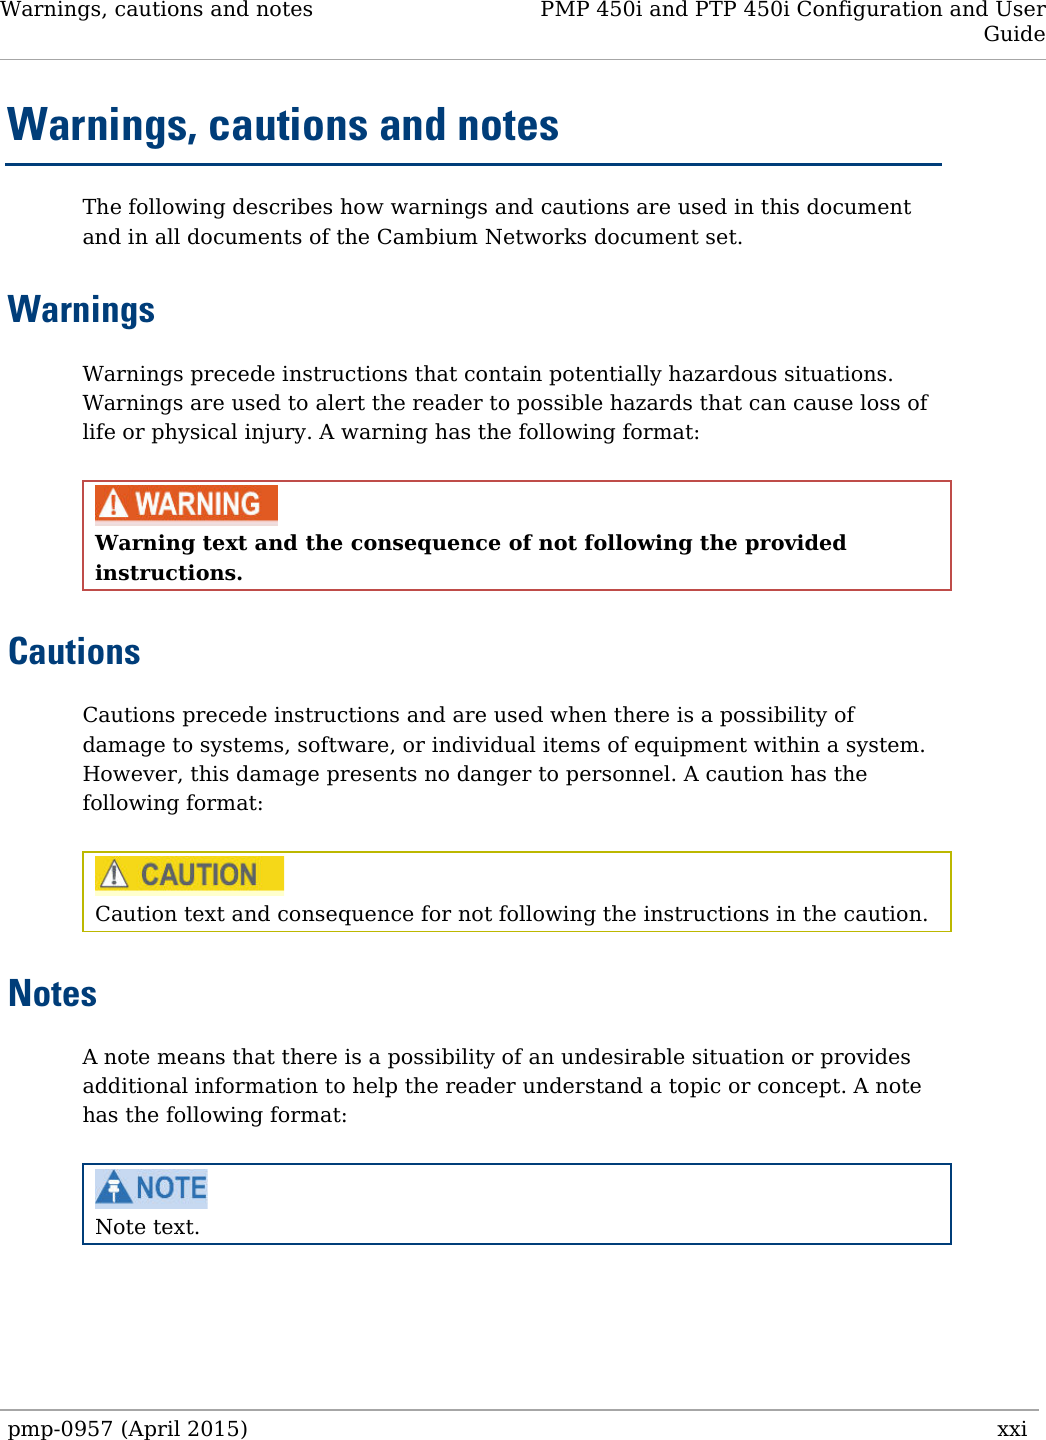 Warnings, cautions and notes PMP 450i and PTP 450i Configuration and User Guide  Warnings, cautions and notes The following describes how warnings and cautions are used in this document and in all documents of the Cambium Networks document set. Warnings Warnings precede instructions that contain potentially hazardous situations. Warnings are used to alert the reader to possible hazards that can cause loss of life or physical injury. A warning has the following format:   Warning text and the consequence of not following the provided instructions.  Cautions Cautions precede instructions and are used when there is a possibility of damage to systems, software, or individual items of equipment within a system. However, this damage presents no danger to personnel. A caution has the following format:   Caution text and consequence for not following the instructions in the caution. Notes A note means that there is a possibility of an undesirable situation or provides additional information to help the reader understand a topic or concept. A note has the following format:   Note text.pmp-0957 (April 2015)   xxi  